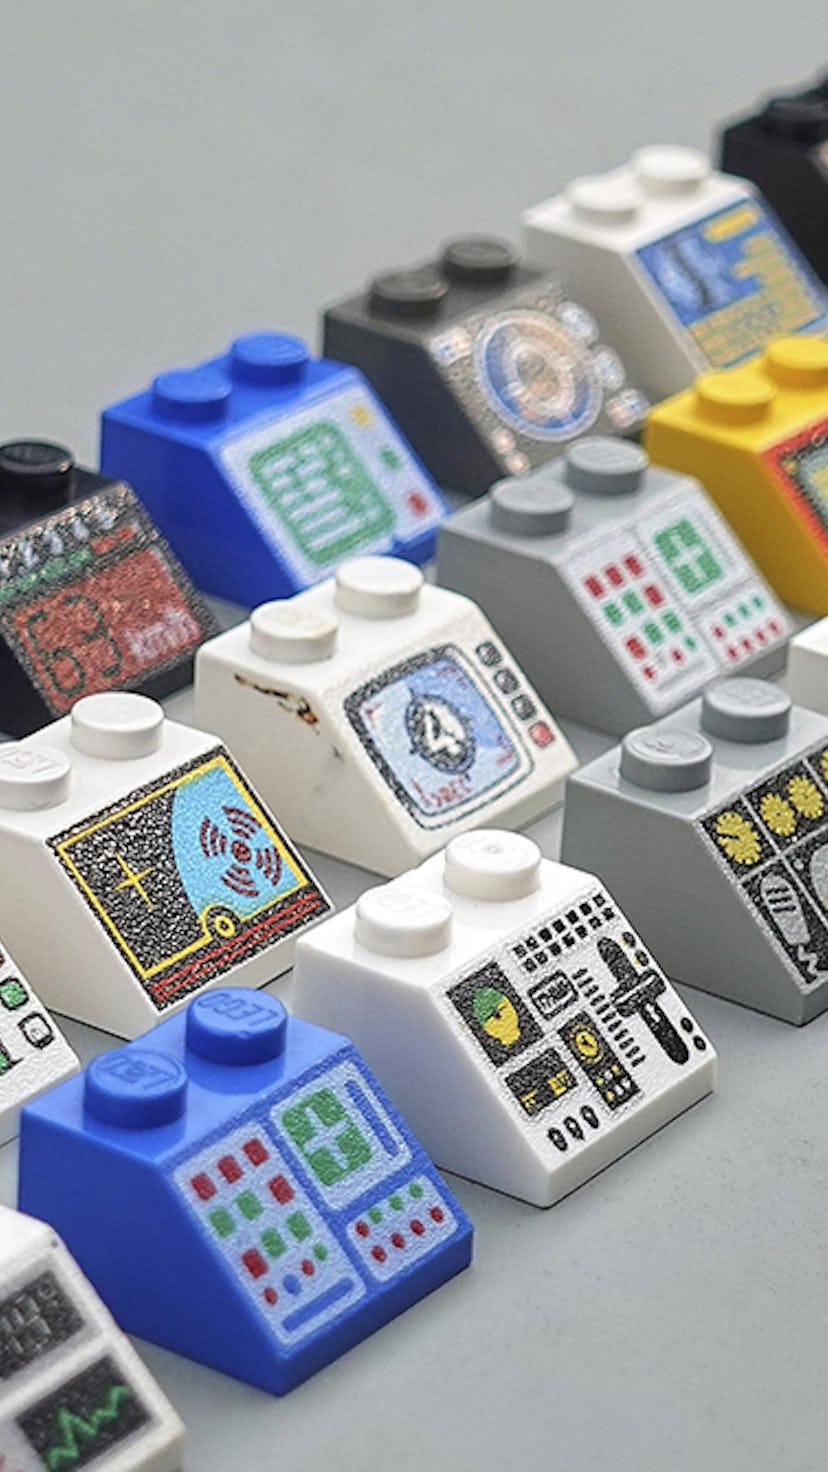 A selection of Lego control panels